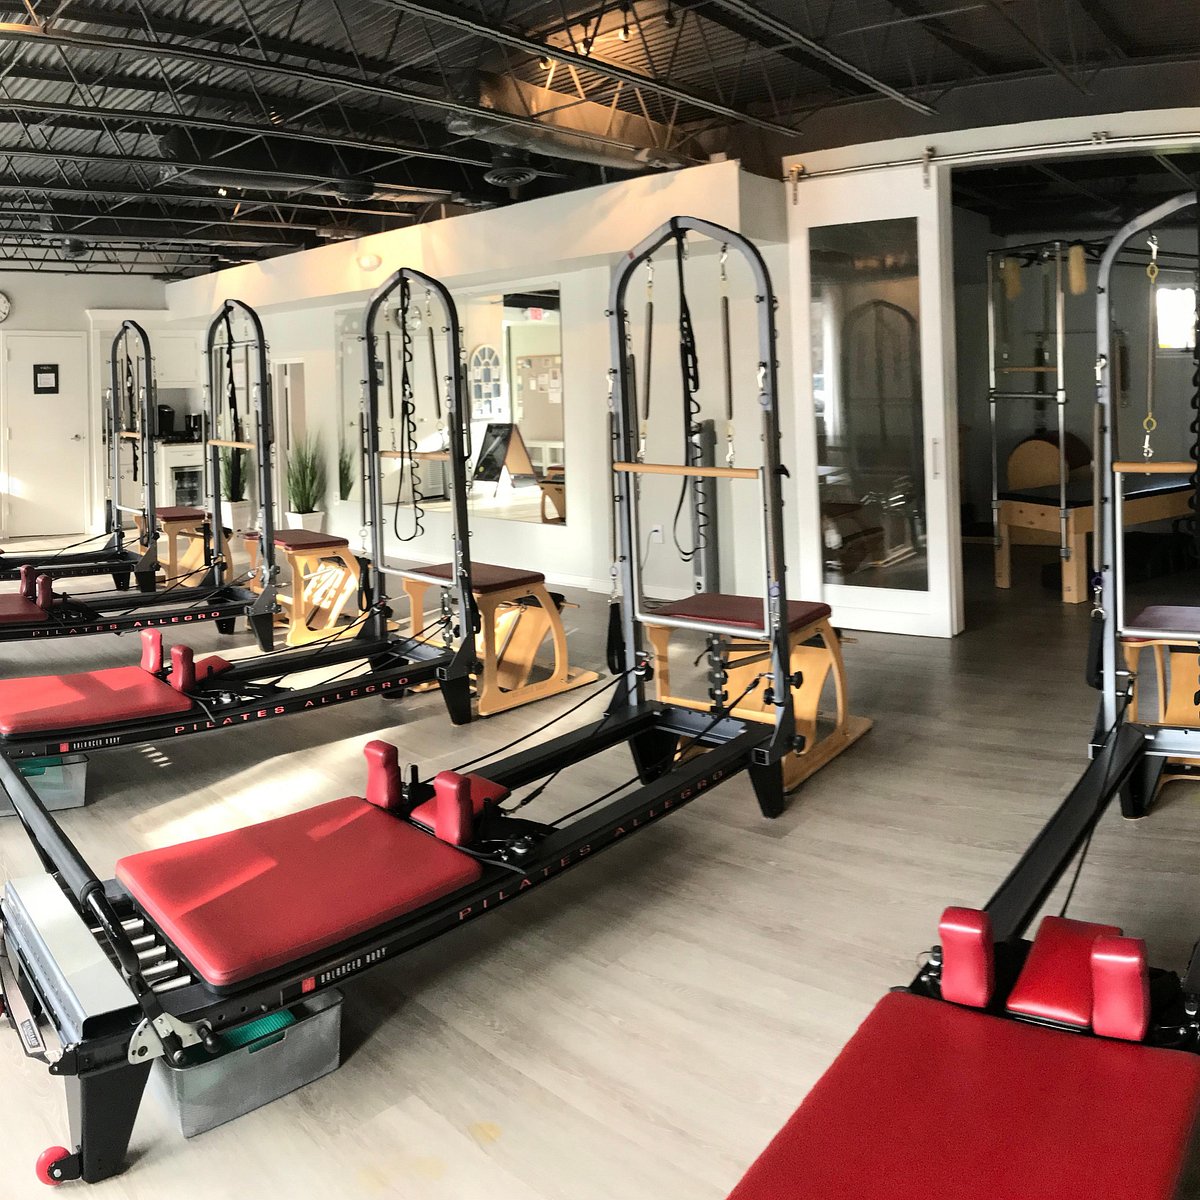 McLean Pilates: What is the Cadillac? - McLean Pilates Studio